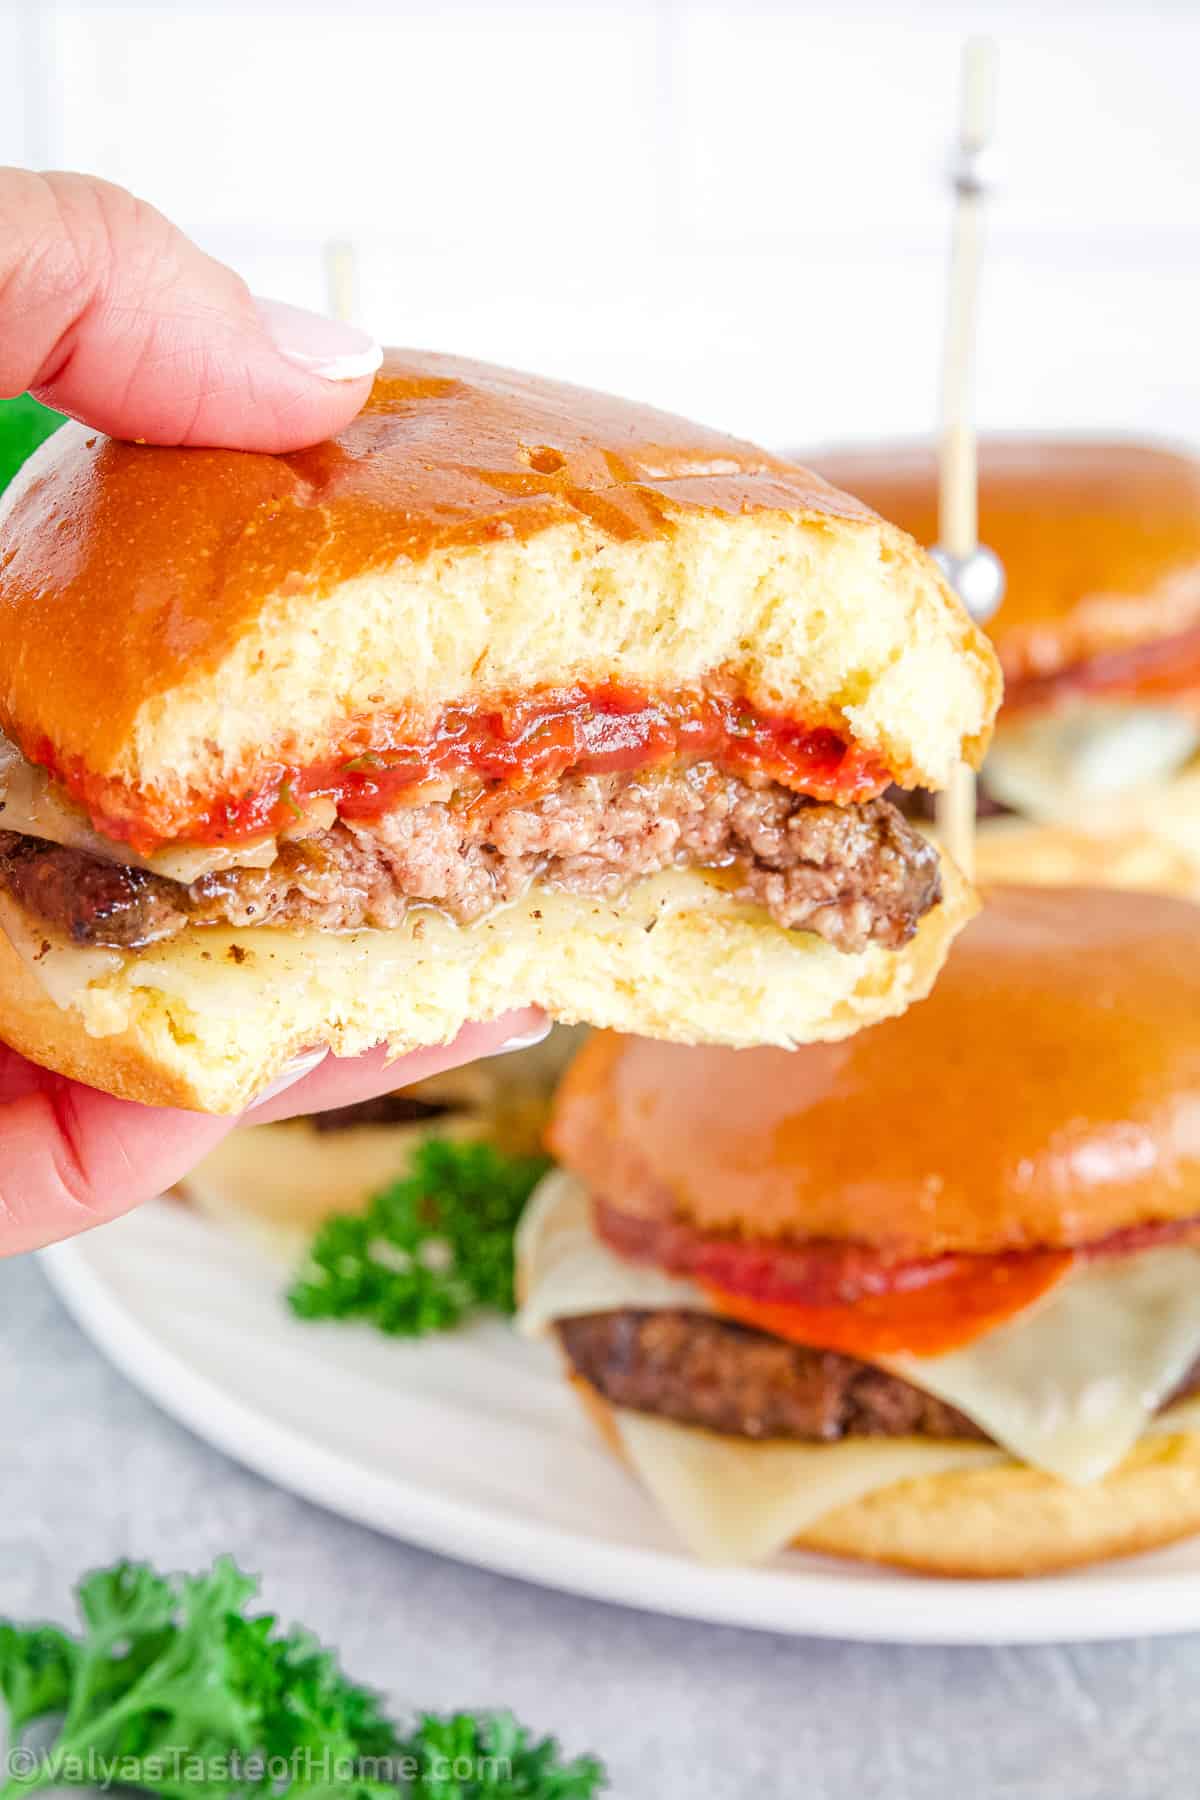 With its juicy beef patty, melty cheese, tangy tomato sauce, and delicious bun, each bite is a harmonious blend of flavors and textures that will satisfy any craving.